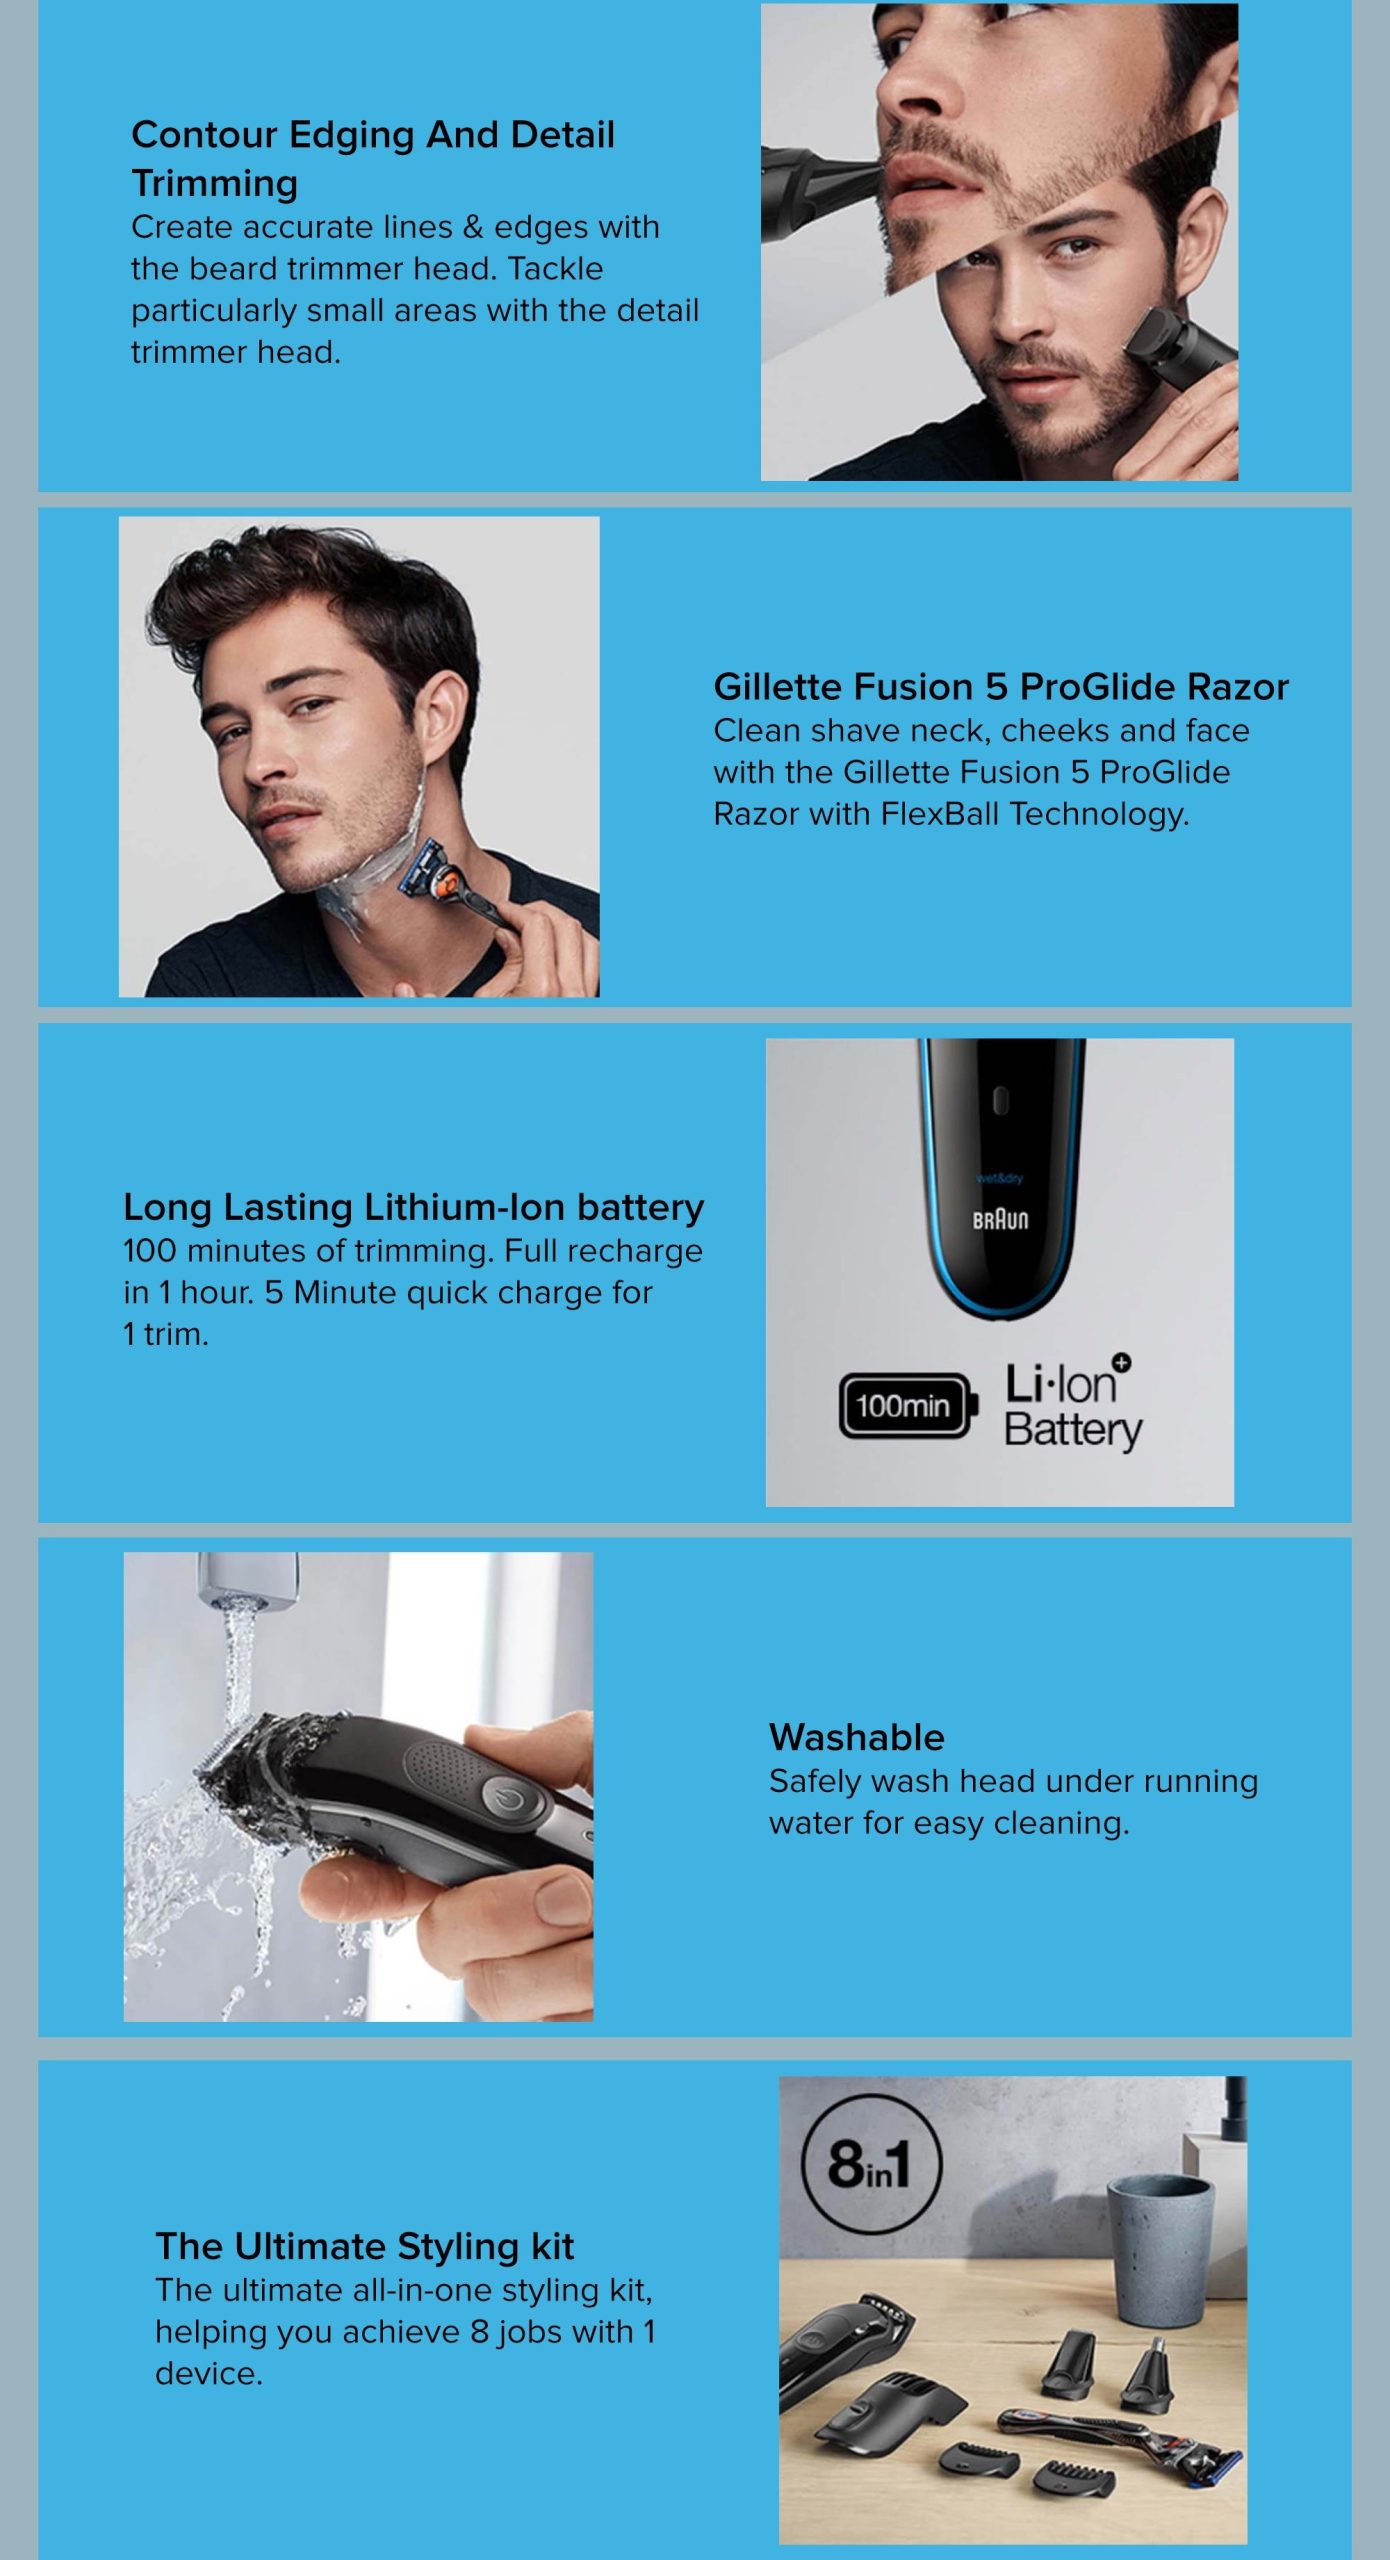 Buy Braun MGK5260 trimmer for Men in UAE | PLUGnPOINT